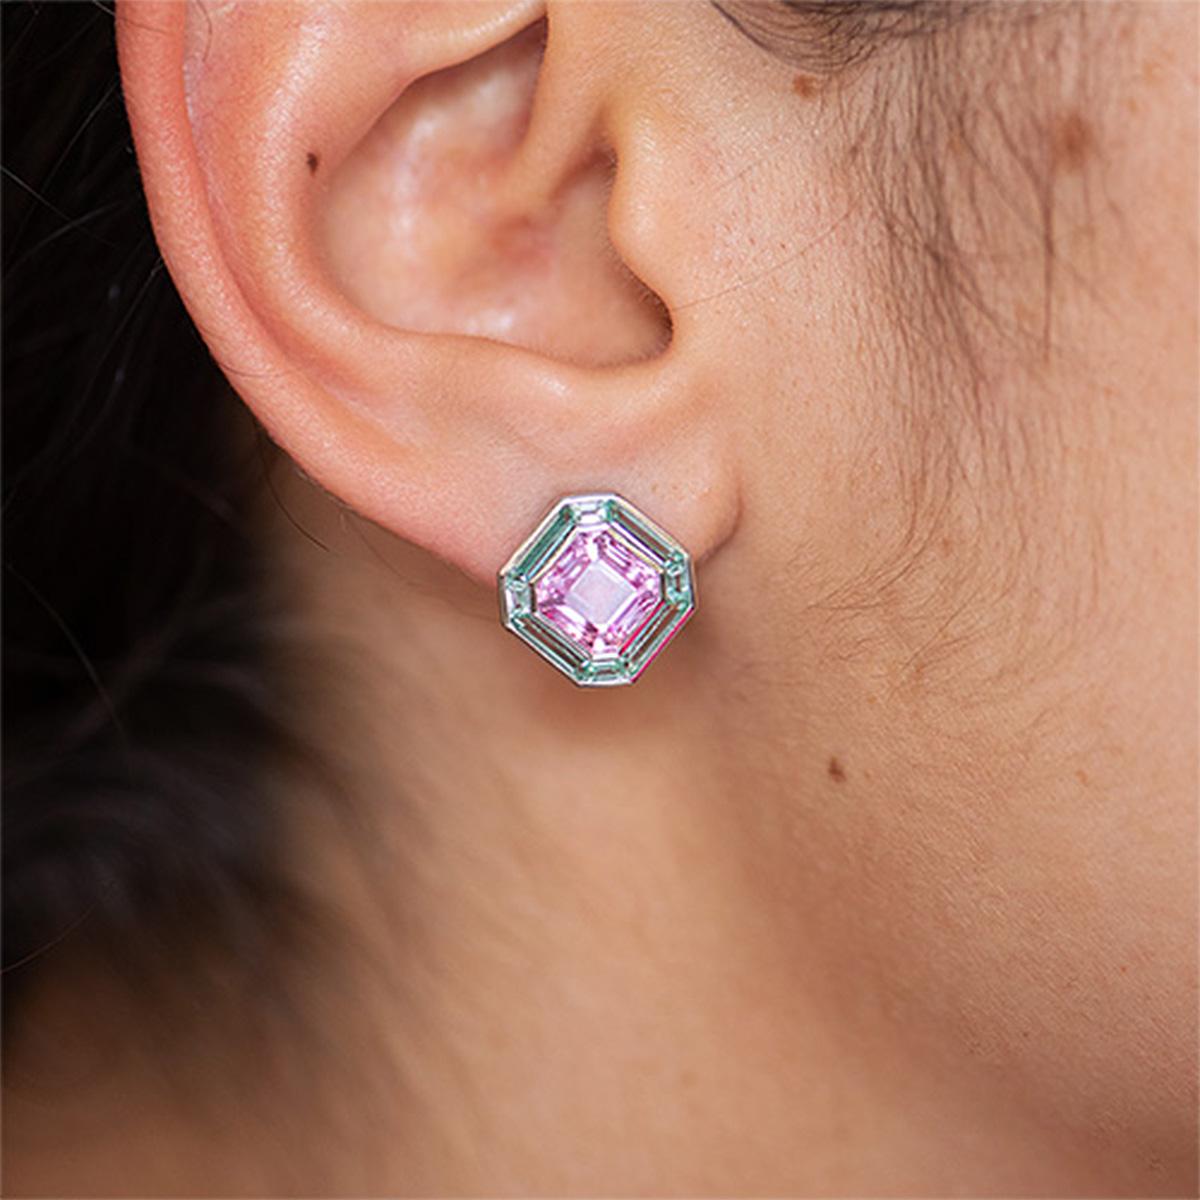 A combination of a great love for the Asscher cut, and a great love for 70’s disco gave birth to these glamorous studs. The Asscher cut is known for its “Hall of Mirrors” effect– the dazzling optical illusion created by the cut’s 72 facets. The